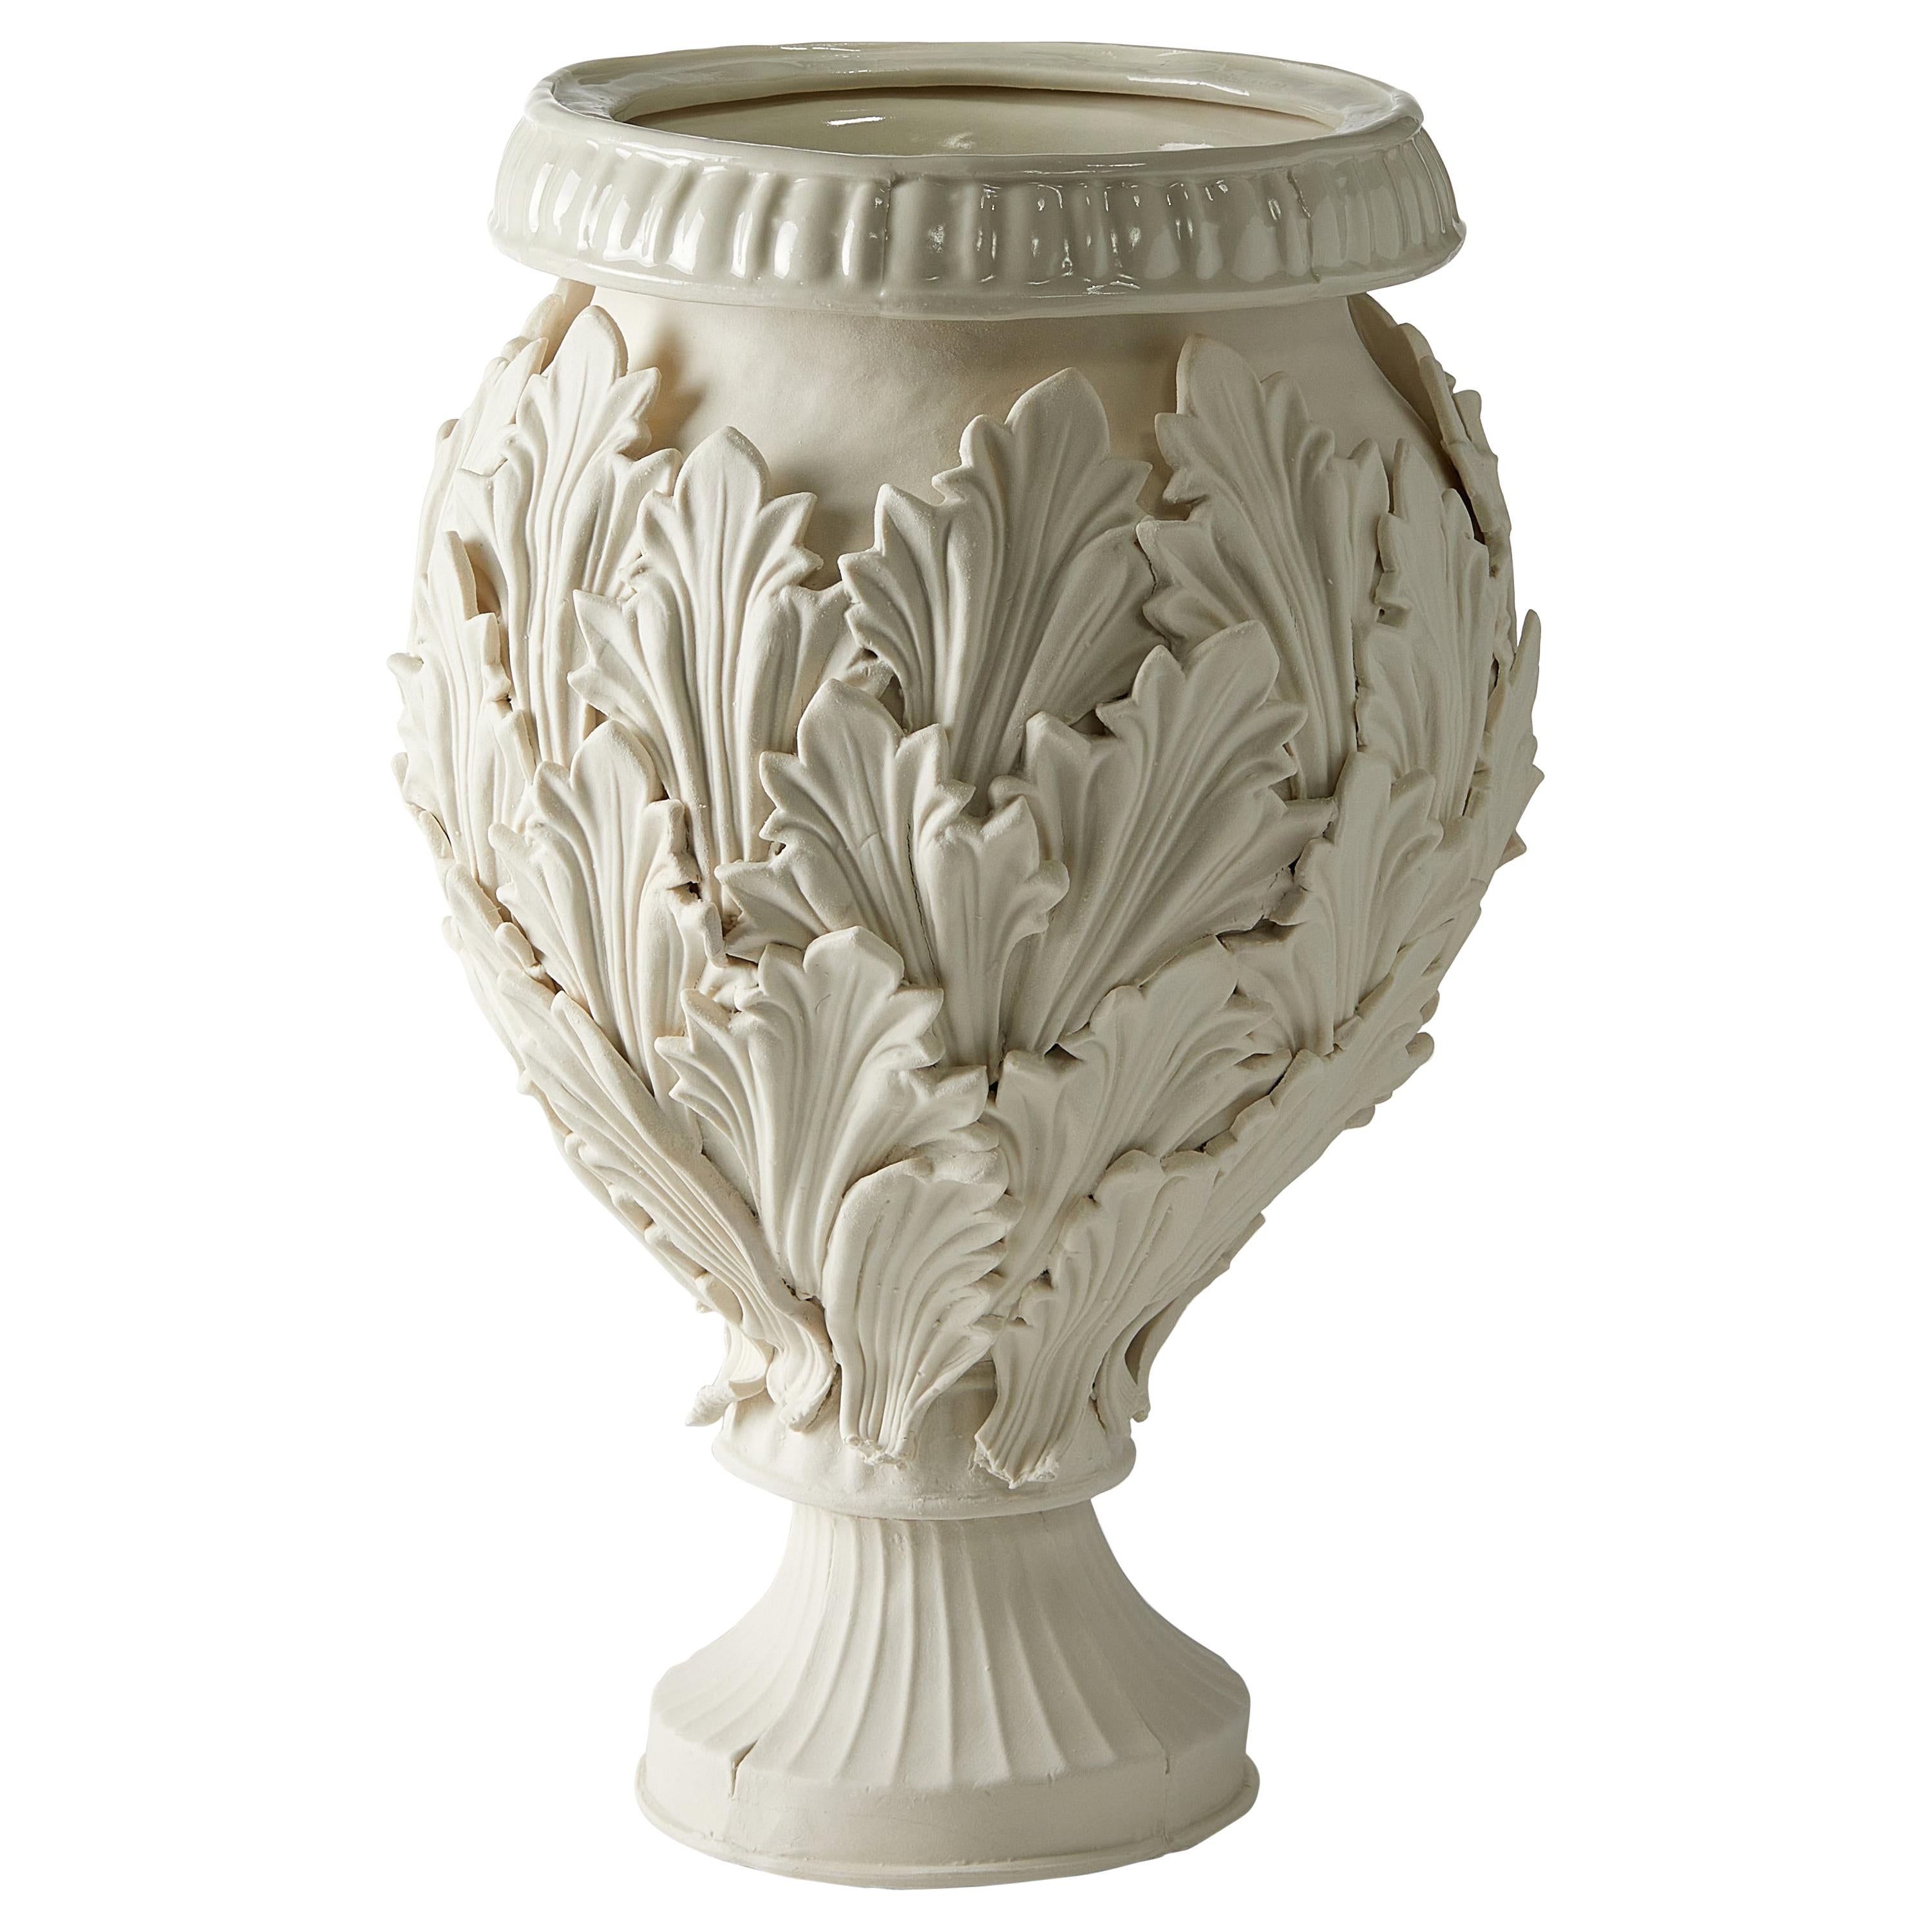 Acanthus I, a Unique Handmade Porcelain Vase with Leaf Decoration by Amy Hughes For Sale